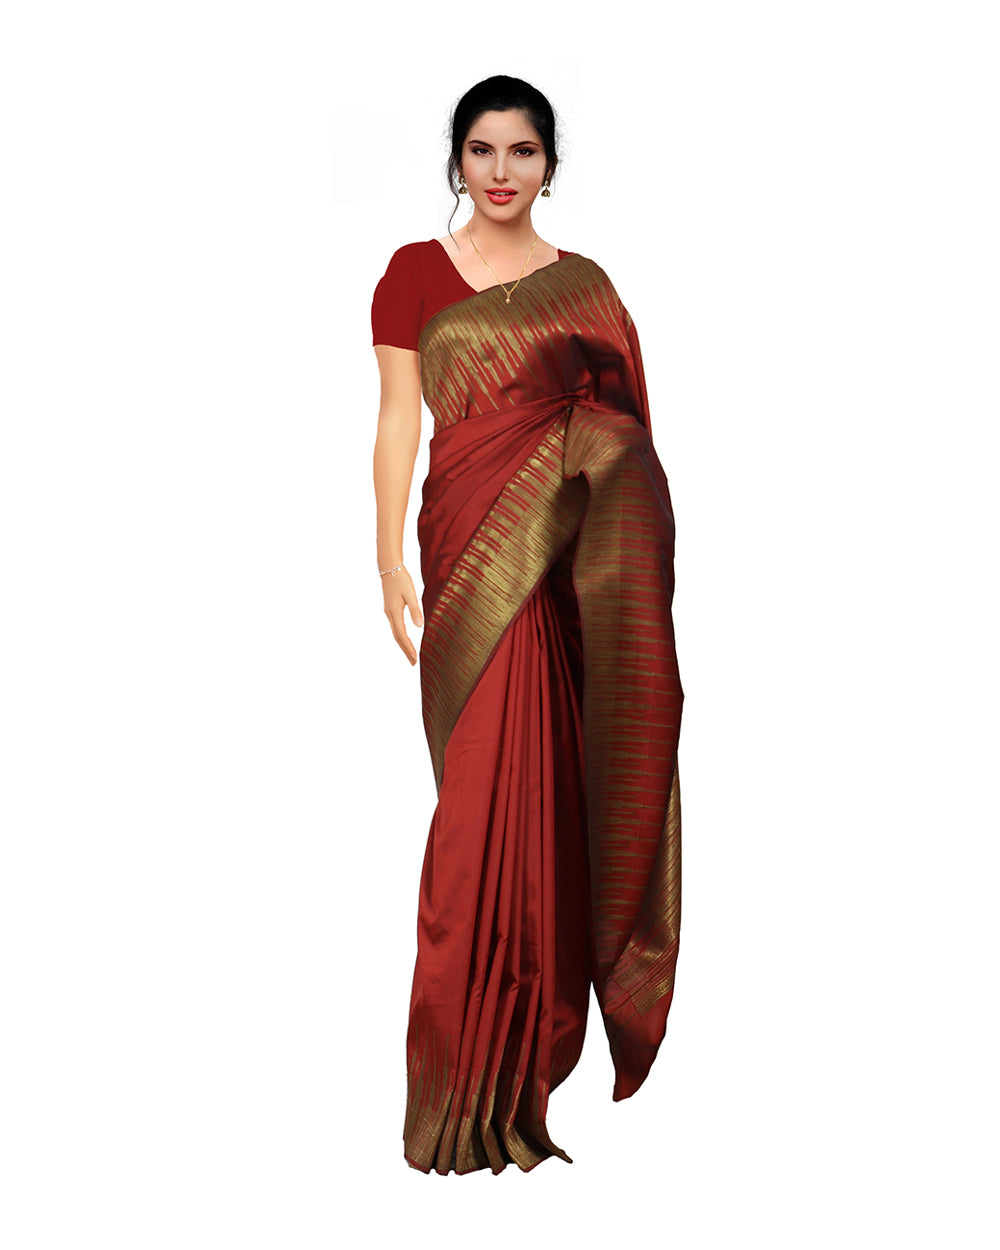 Are art silk sarees soft the same as that of pure silk sarees? - Quora